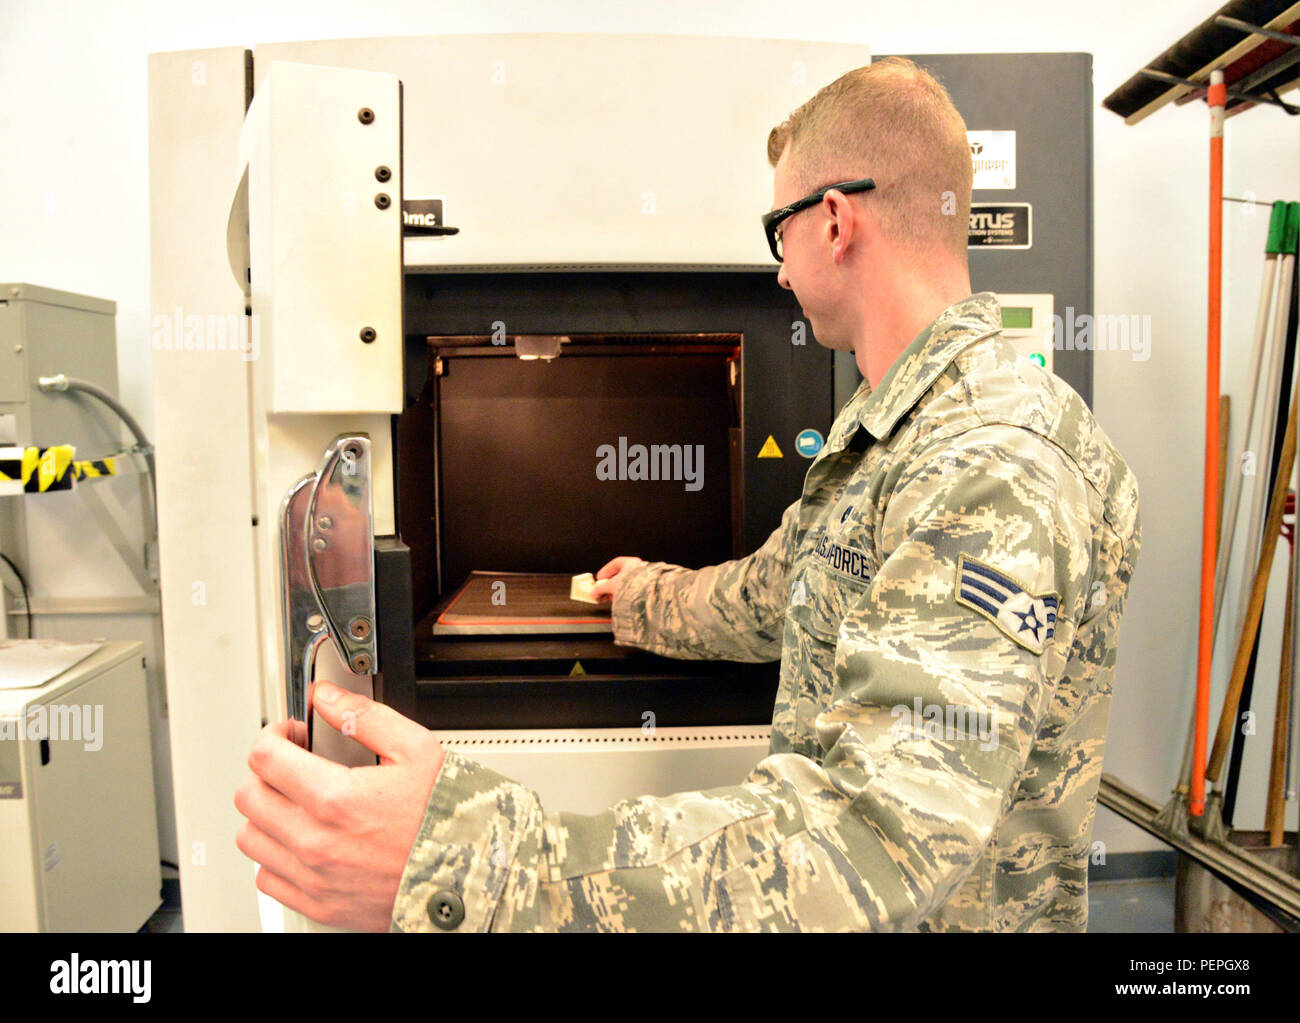 Senior Airman Jordan Brown, an aircraft metals technician, uses the Fortus 400mc, a 3-D printer, in the 552nd Maintenance Squadron’s Fabrications Flight. (Air Force photo by Kelly White) Stock Photo